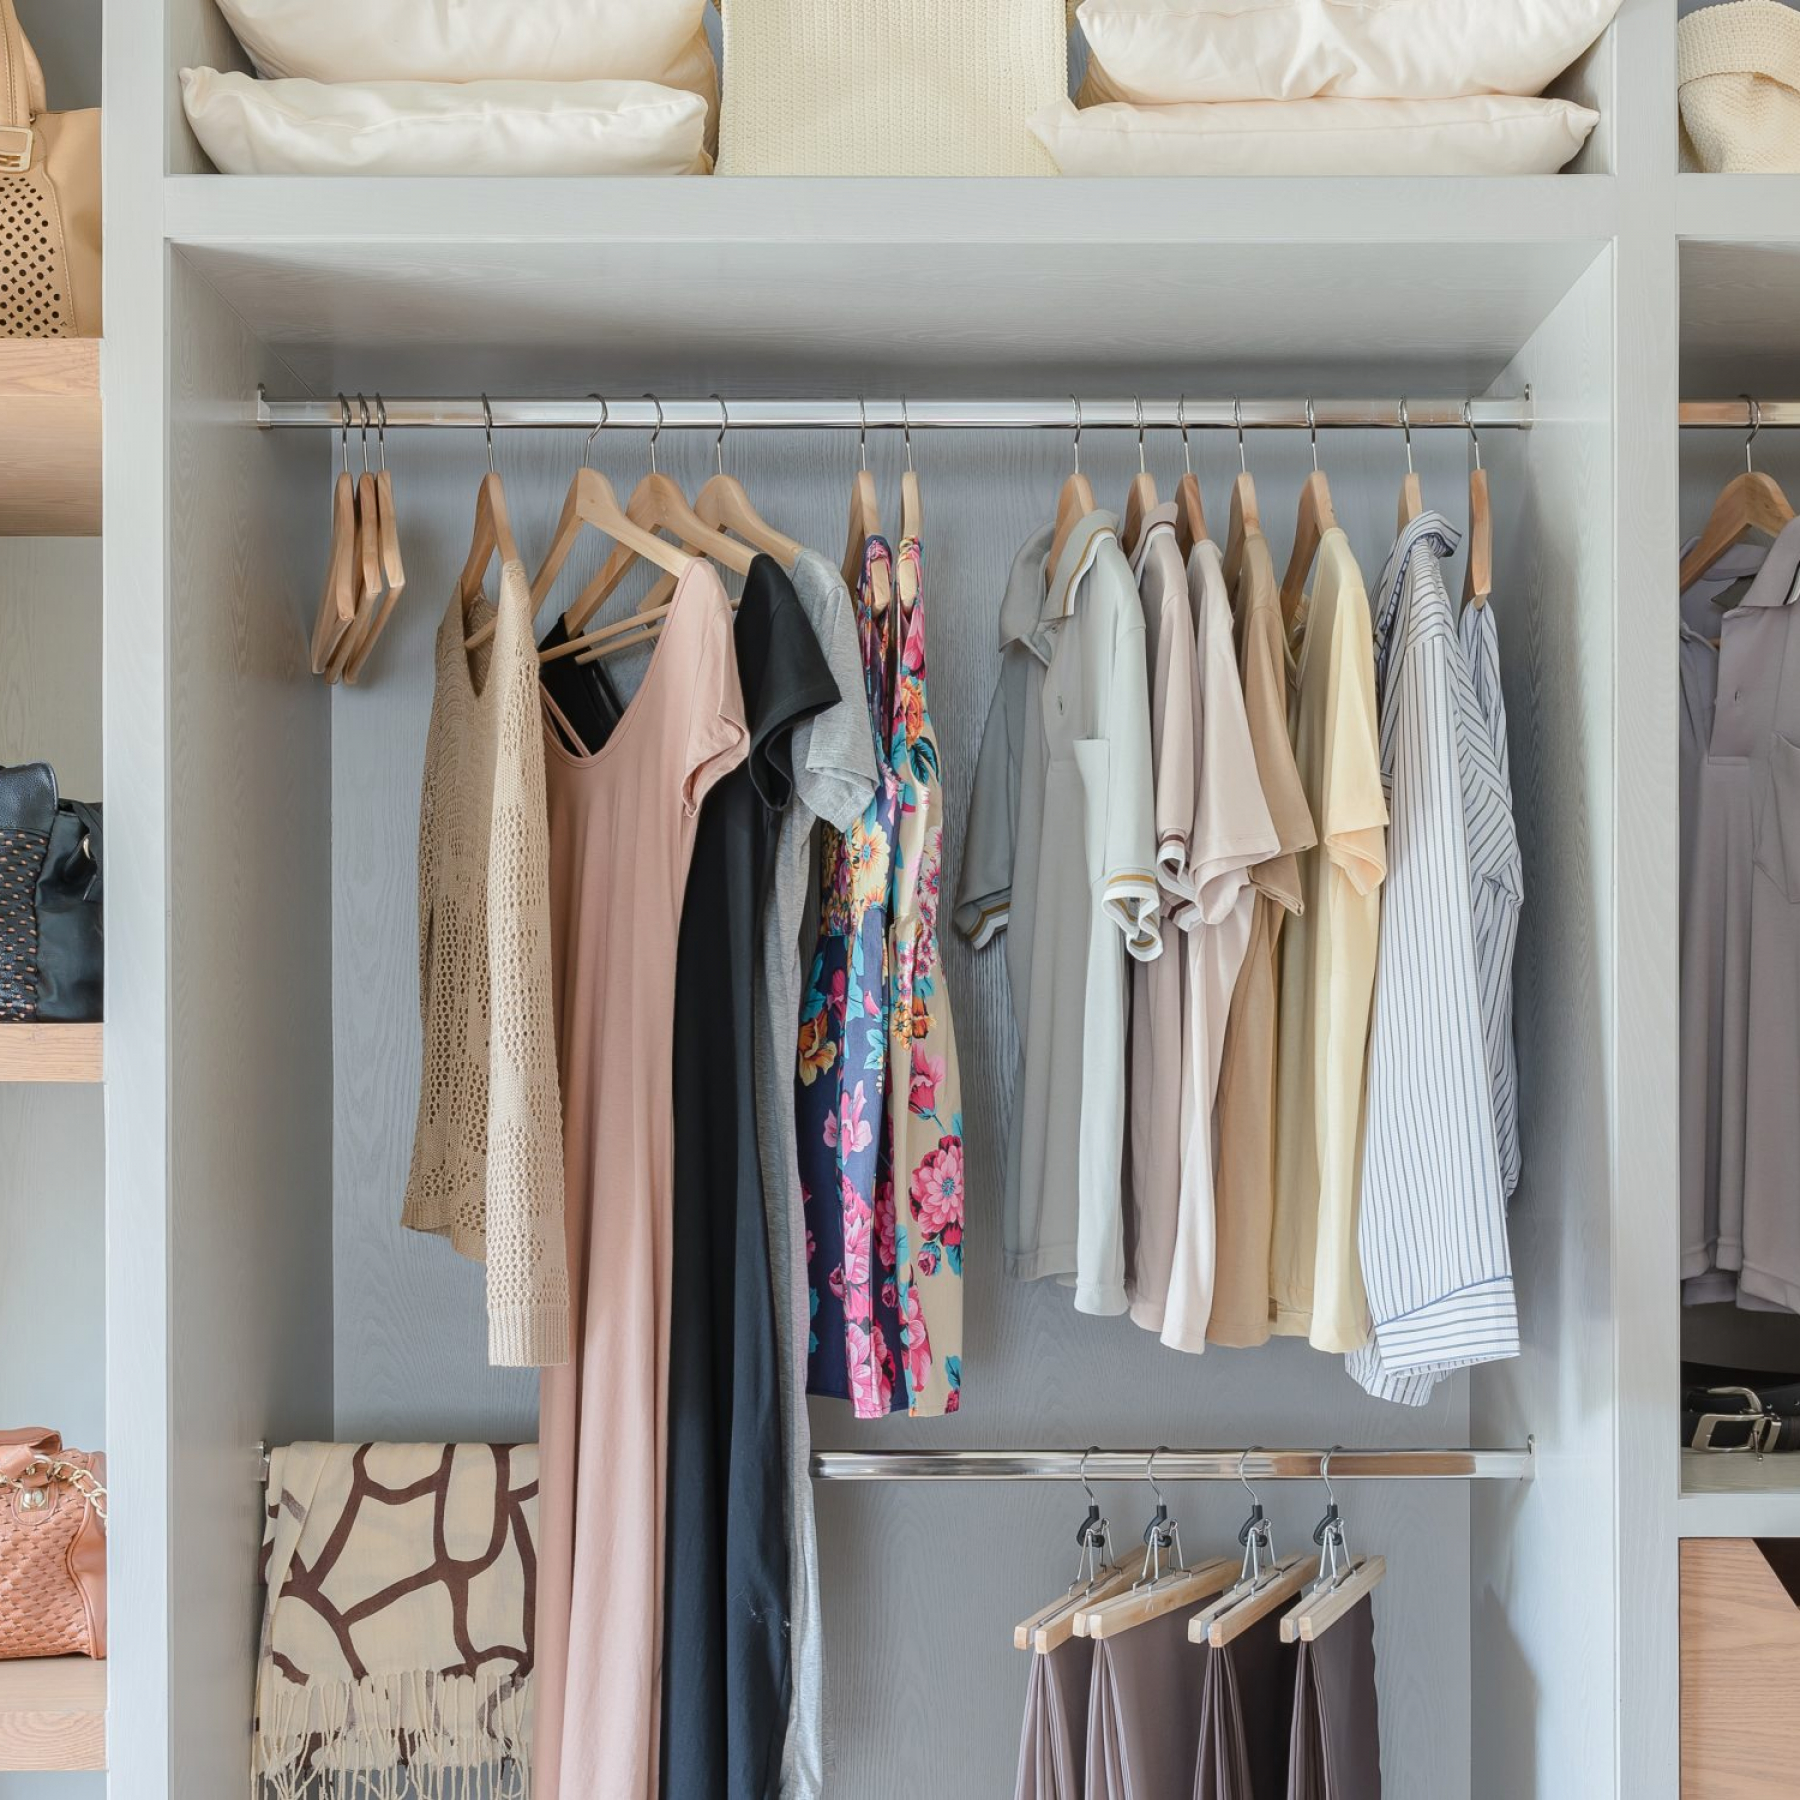 5 organising tips to keep your wardrobe neat and tidy